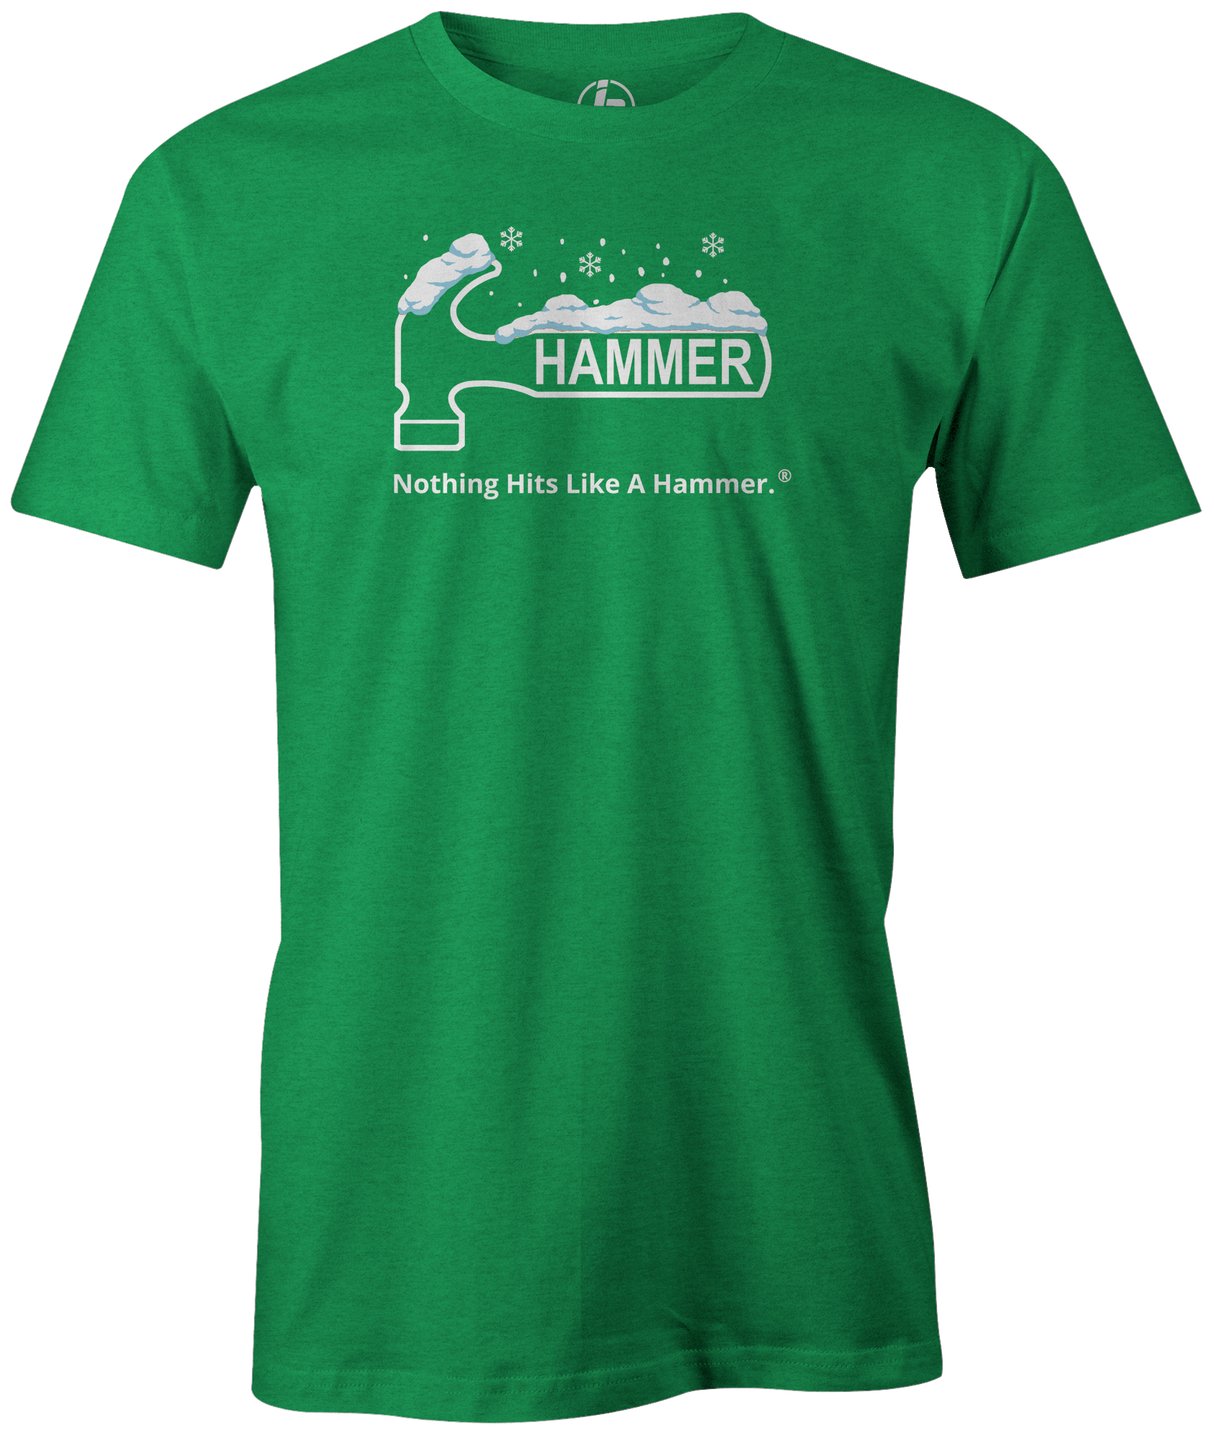 Tis' the season for Christmas bowling tee shirts. Show your Merriness on and off the lanes with the Hammer Holiday T-shirt!  ugly t-shirt comes in red and black colors. Show your holiday spirit with this shirt that helps you hook the ball at your office party or night out with your friends!  Bowling gift holiday gift guide. Tee-shirt gift. Christmas Tree